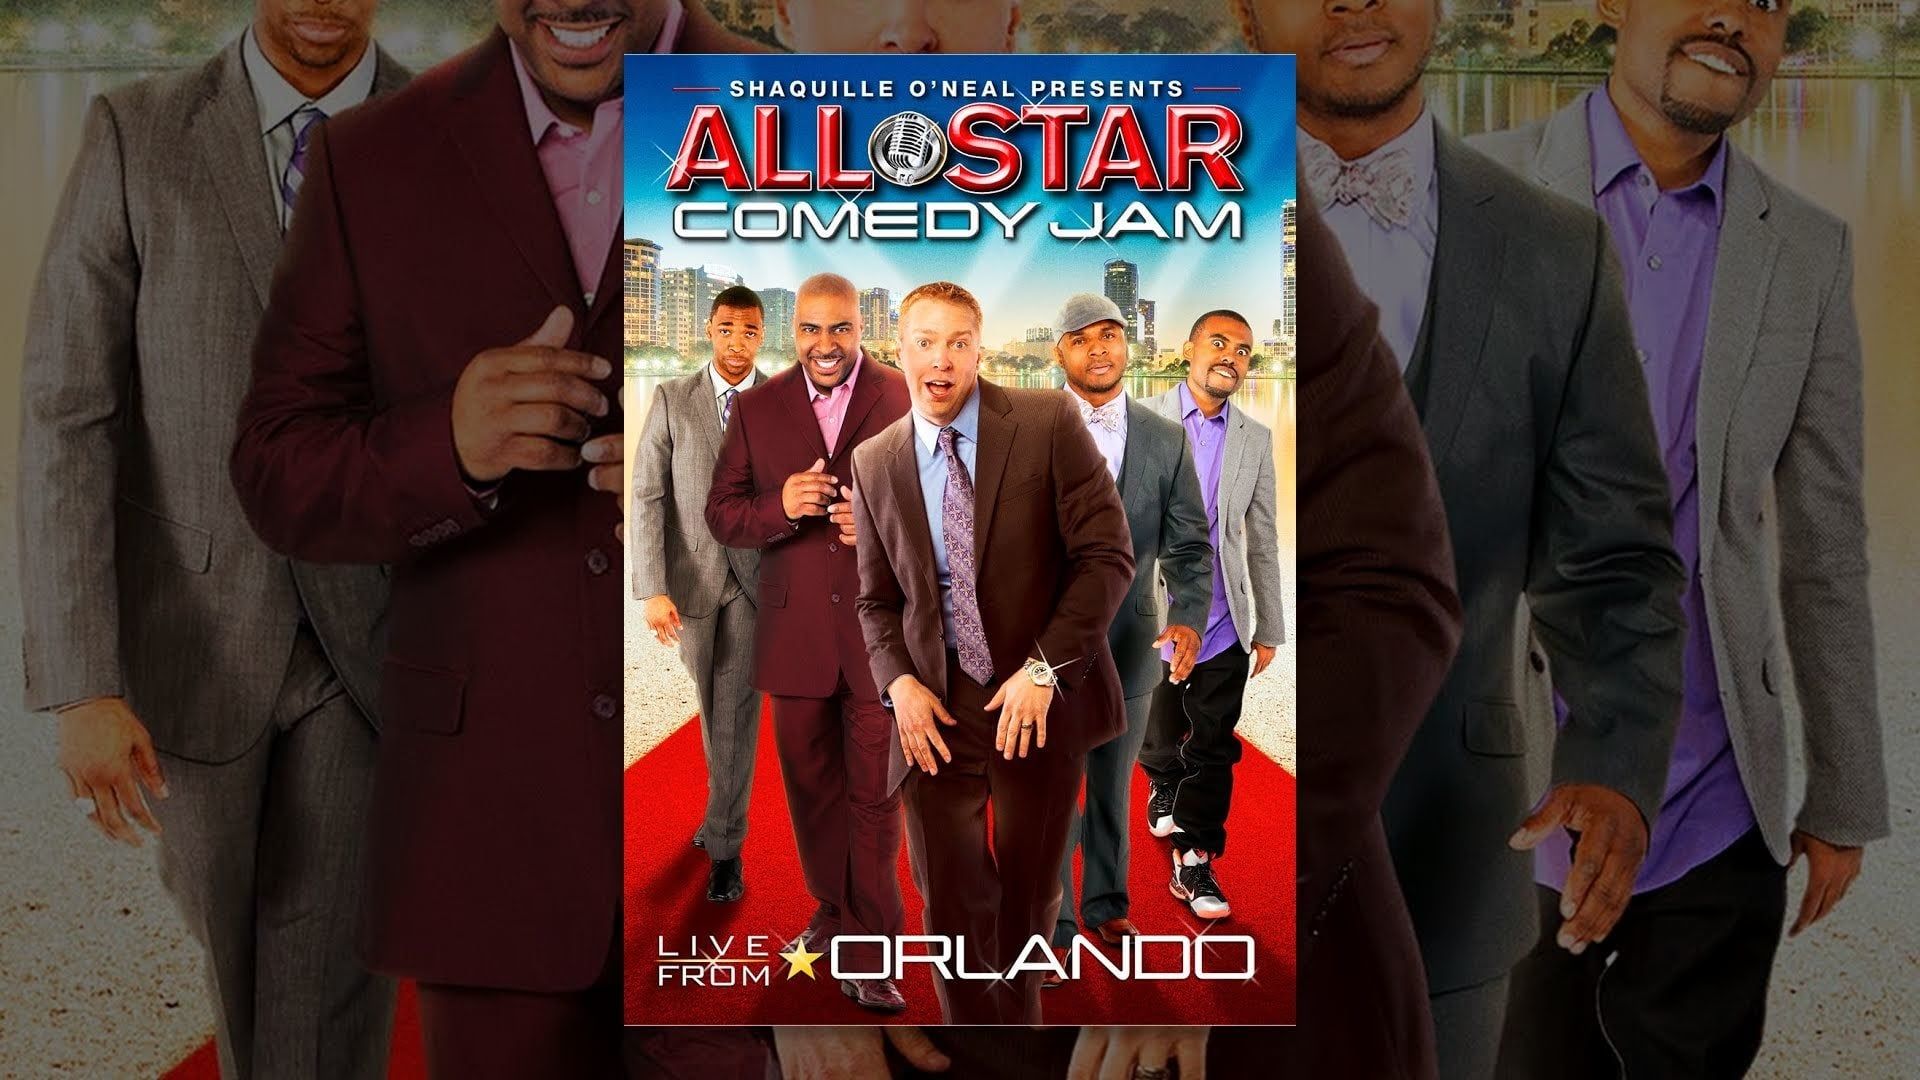 Shaquille O'Neal Presents: All Star Comedy Jam - Live from Orlando background